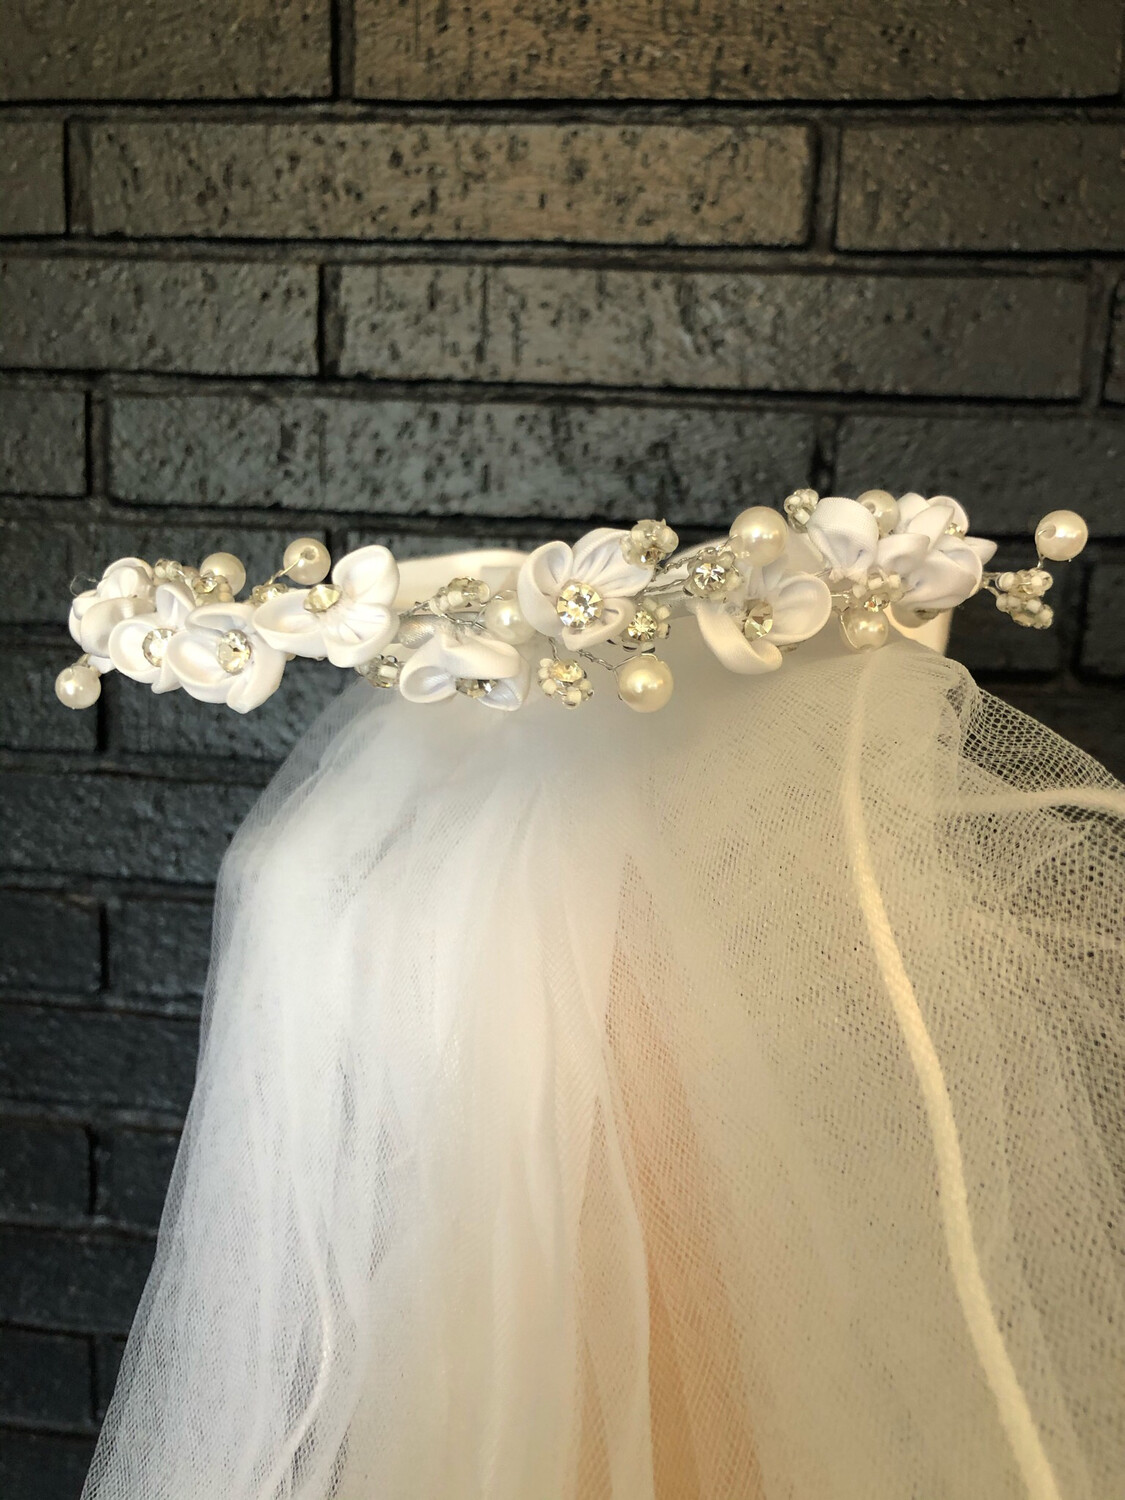 Communion Veil 24" Flowers, Rhinestones, Pearls crown with Satin Bow in Back